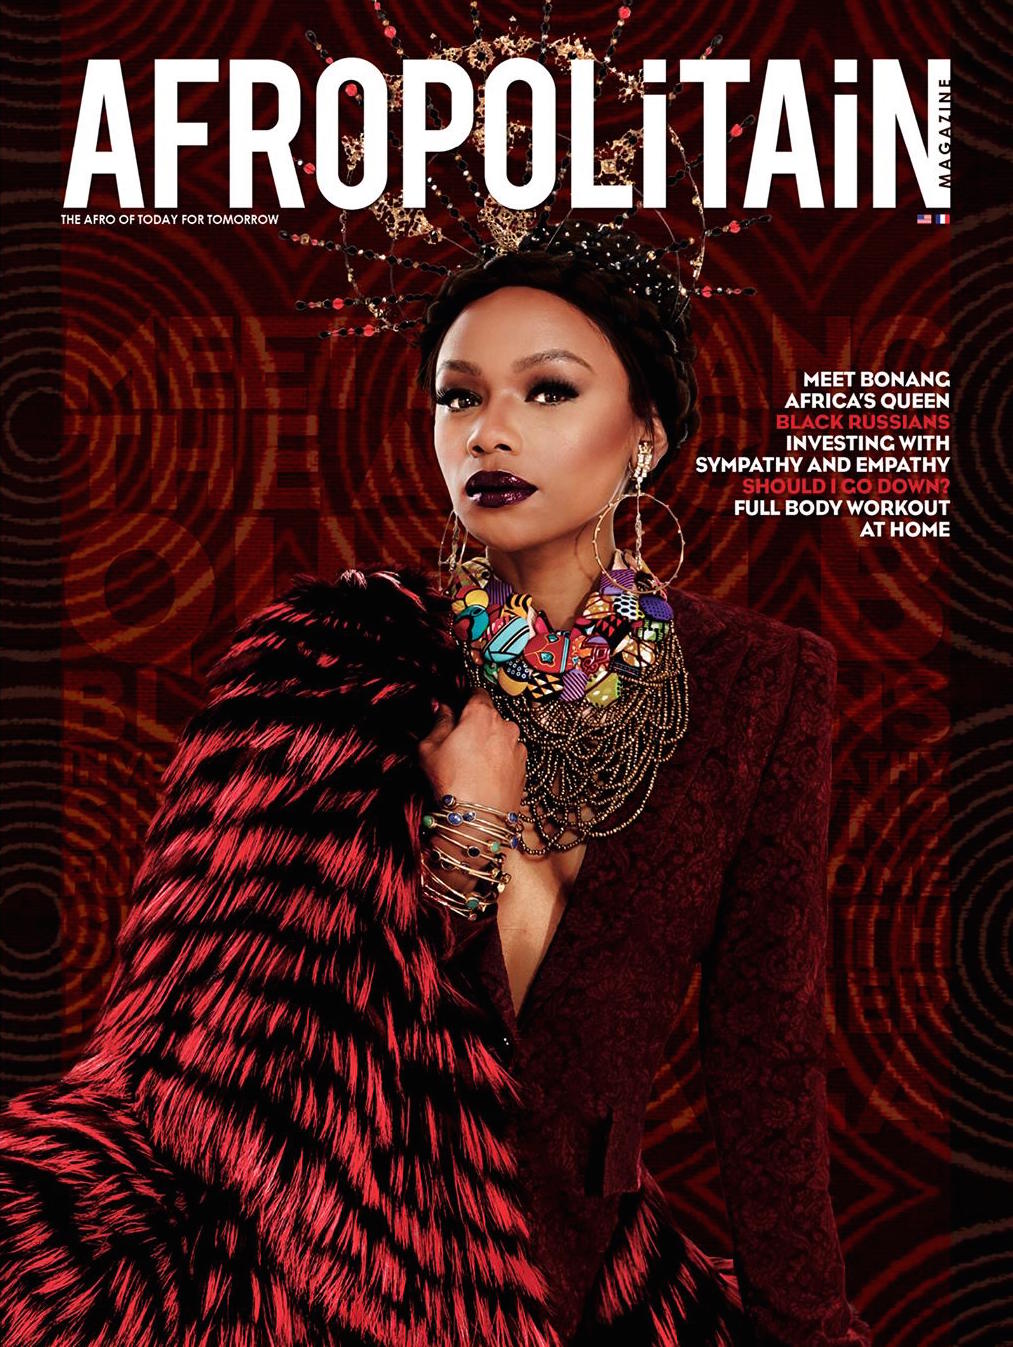 BEST VOGUE COVER-SMARTREZO_TOP AFRICAN FASHION MAGAZINES BY ASOEBIGUEST.COM - AFROPOLITAIN COVER - DN-AFRICA-DN-A INTERNATIONAL - MEDIA PARTNER